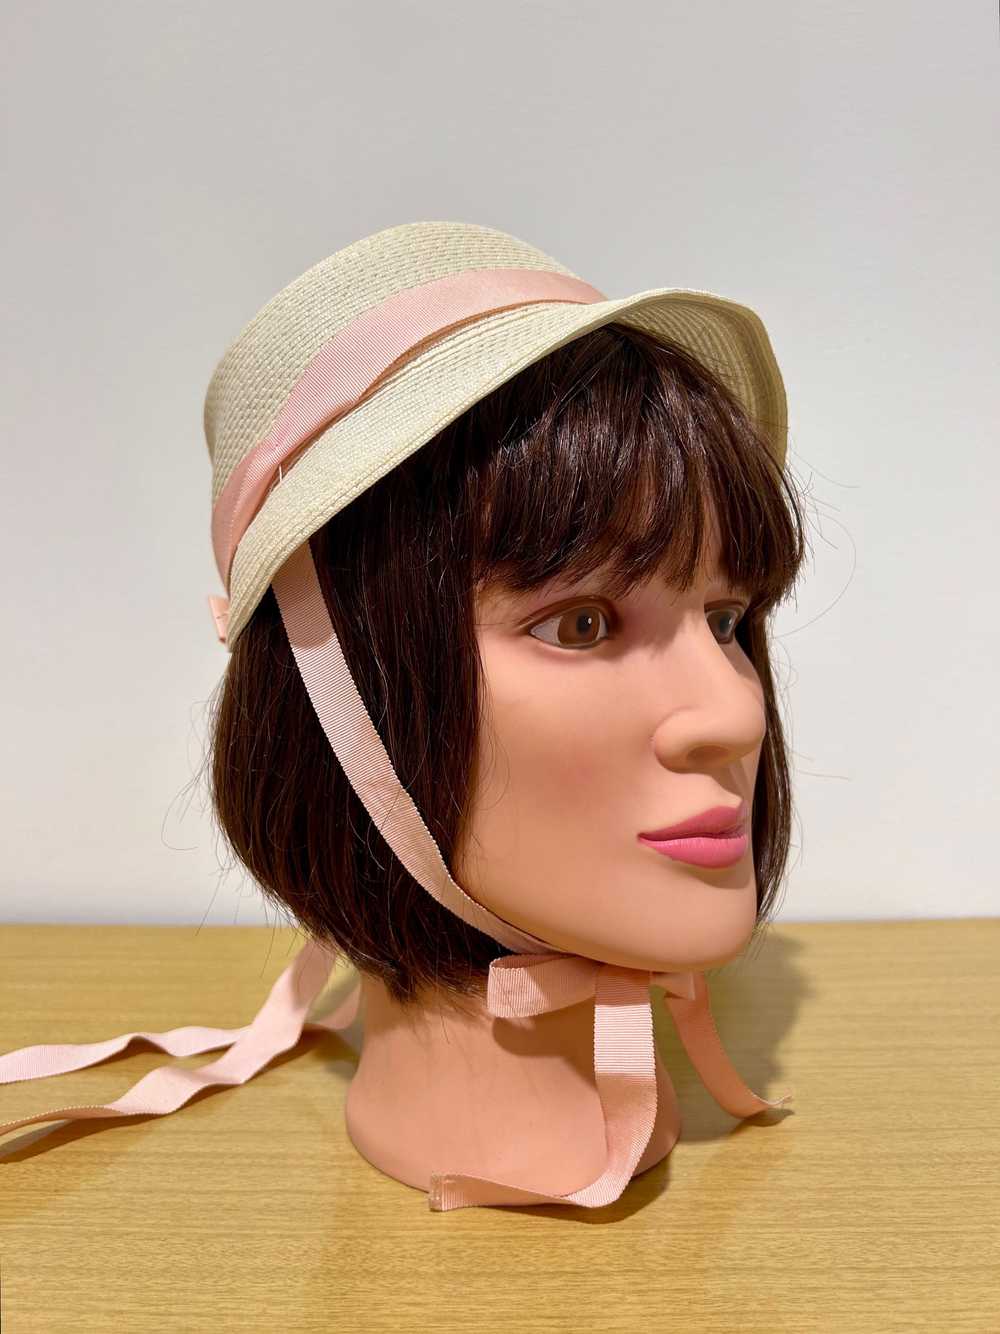 Vintage Sun Hat with Pink Ribbon and Flowers - image 6